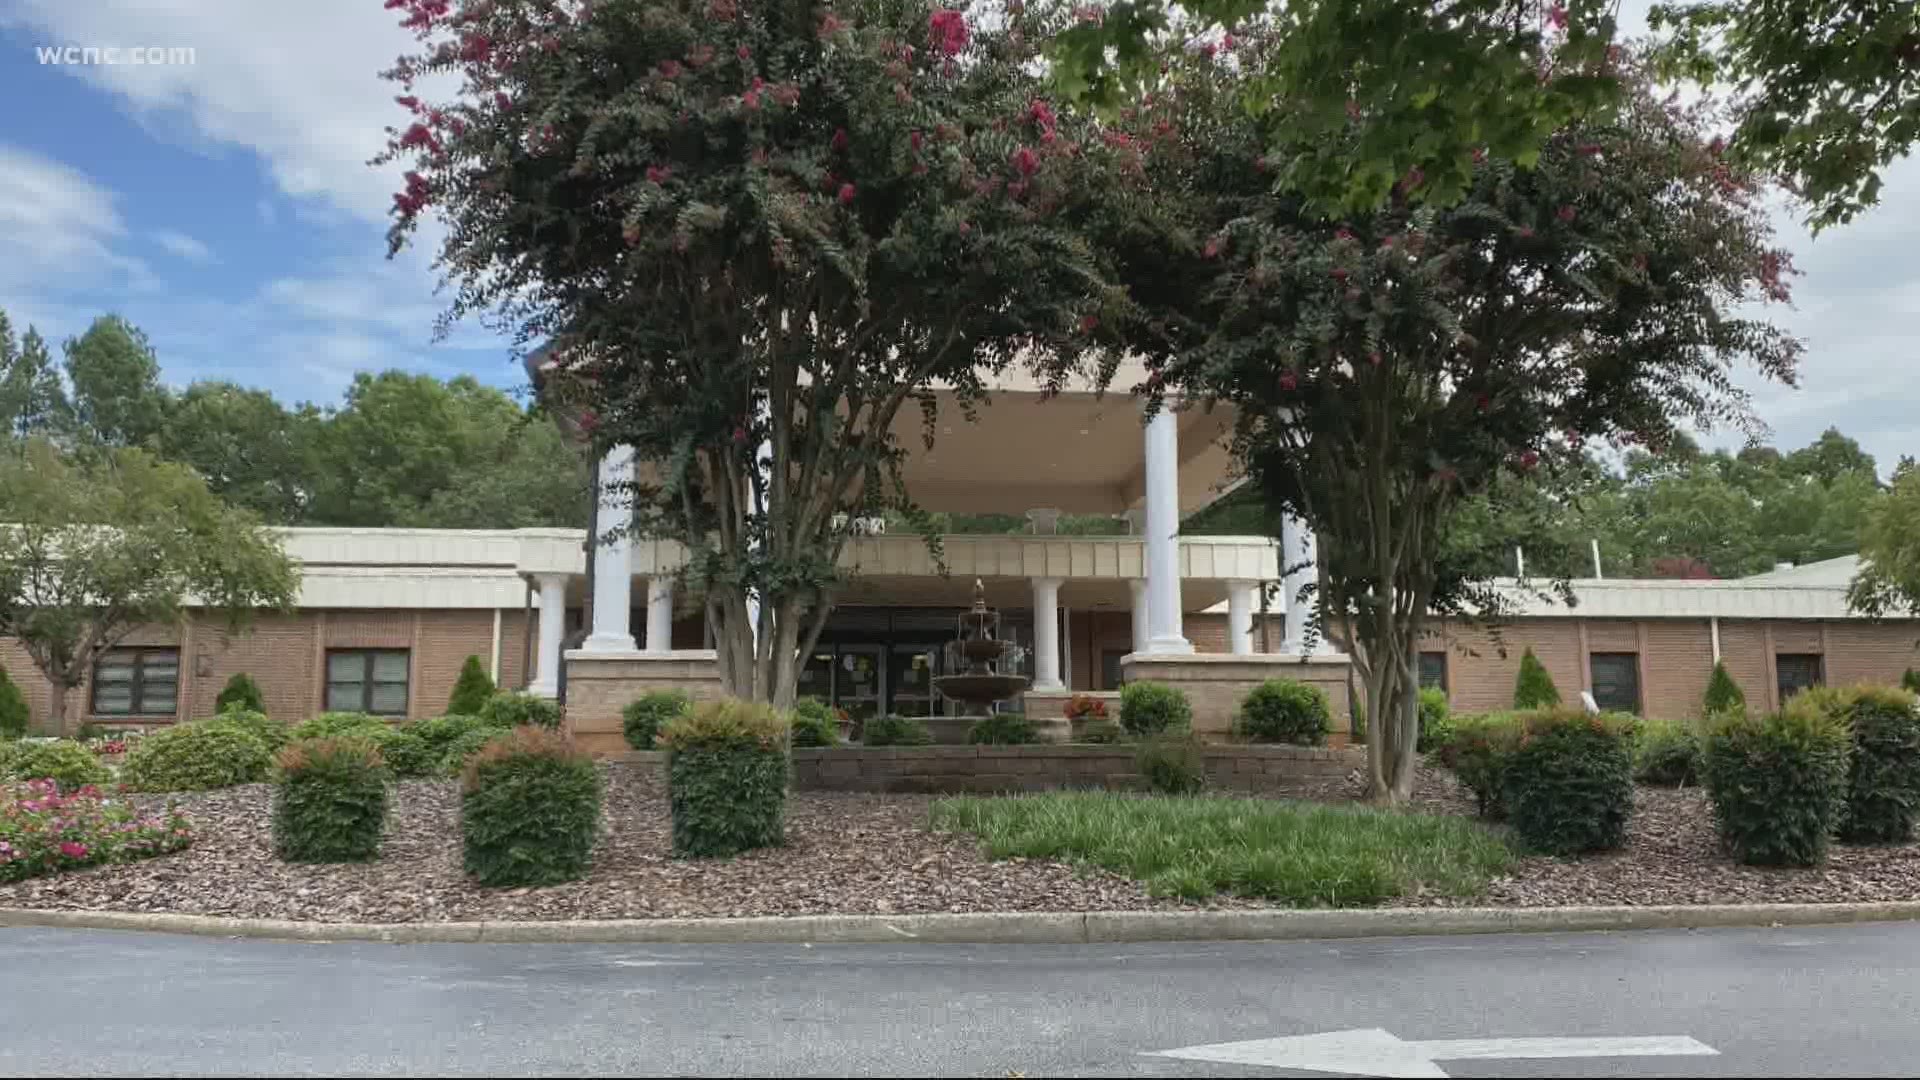 More than 50 residents have tested positive at a retirement community in Salisbury.